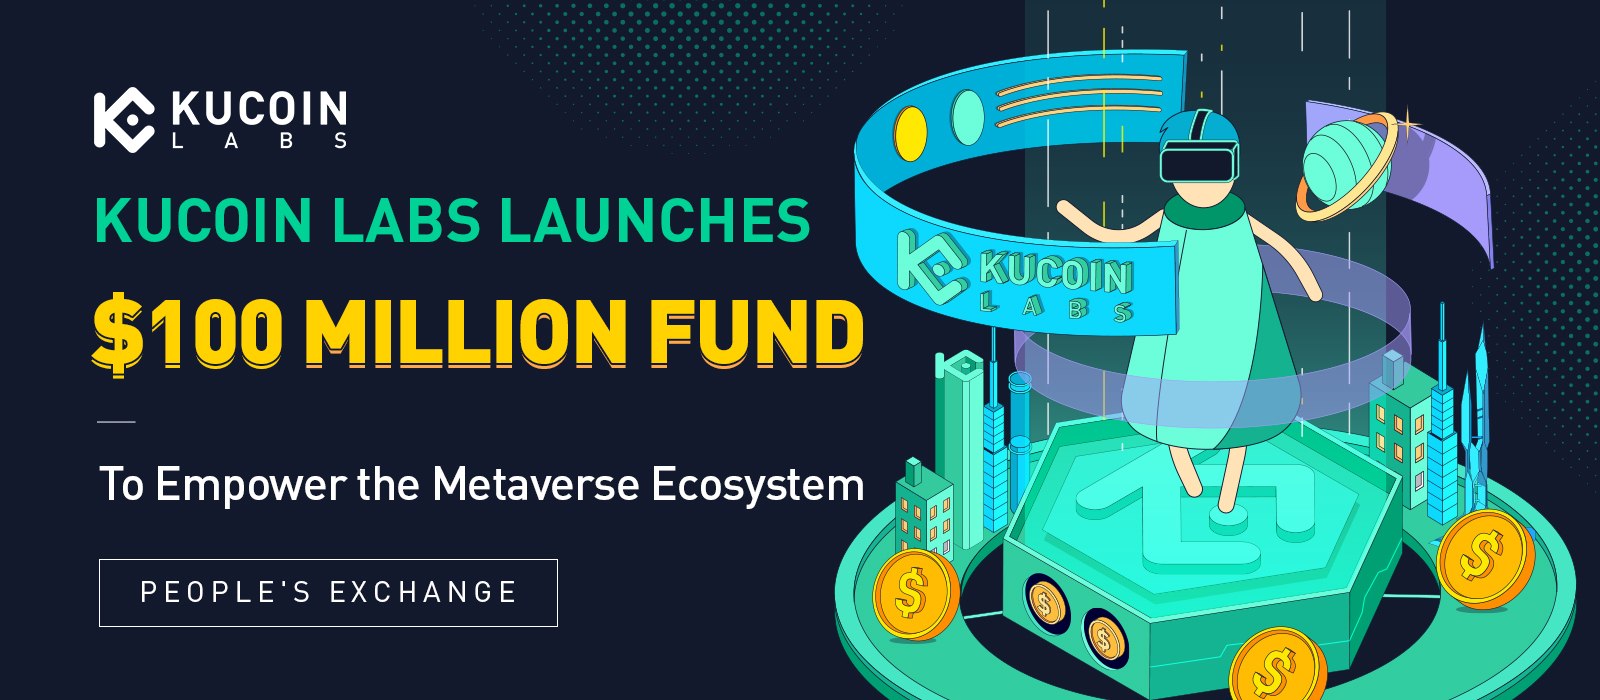 kucoin expecting investment funds